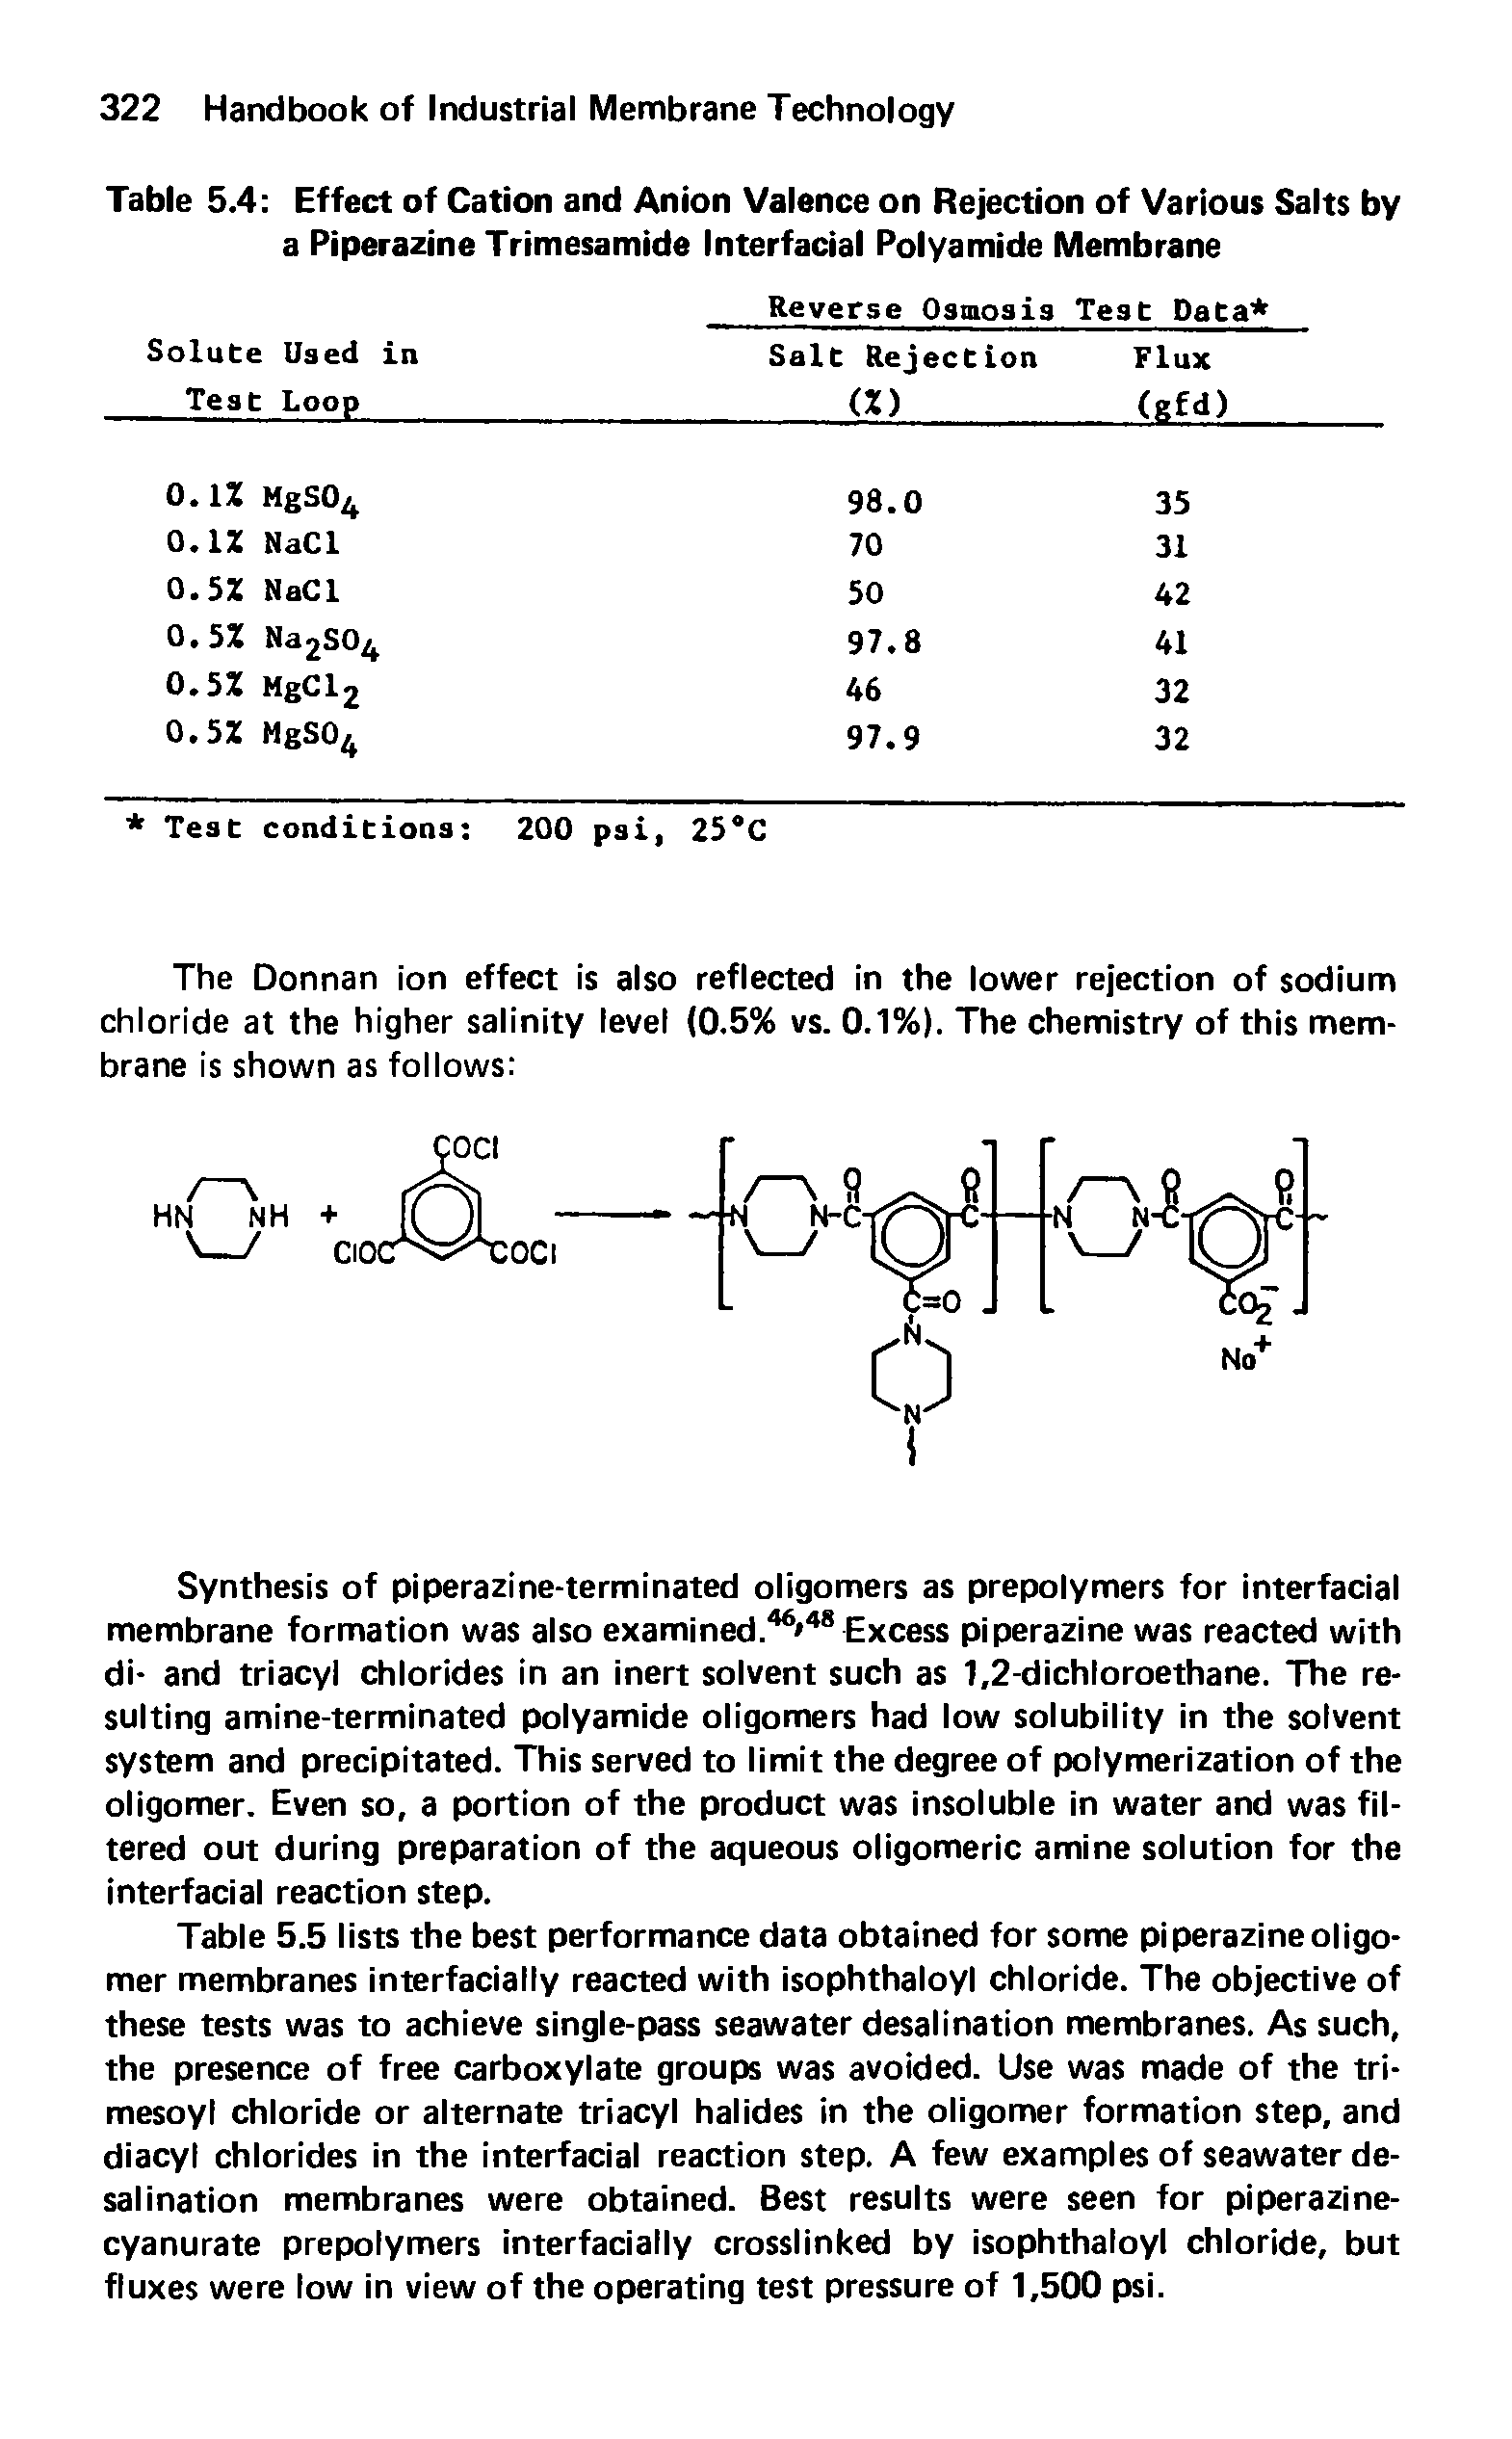 Table 5.4 Effect of Cation and Anion Valence on Rejection of Various Salts by a Piperazine Trimesamide Interfacial Polyamide Membrane...